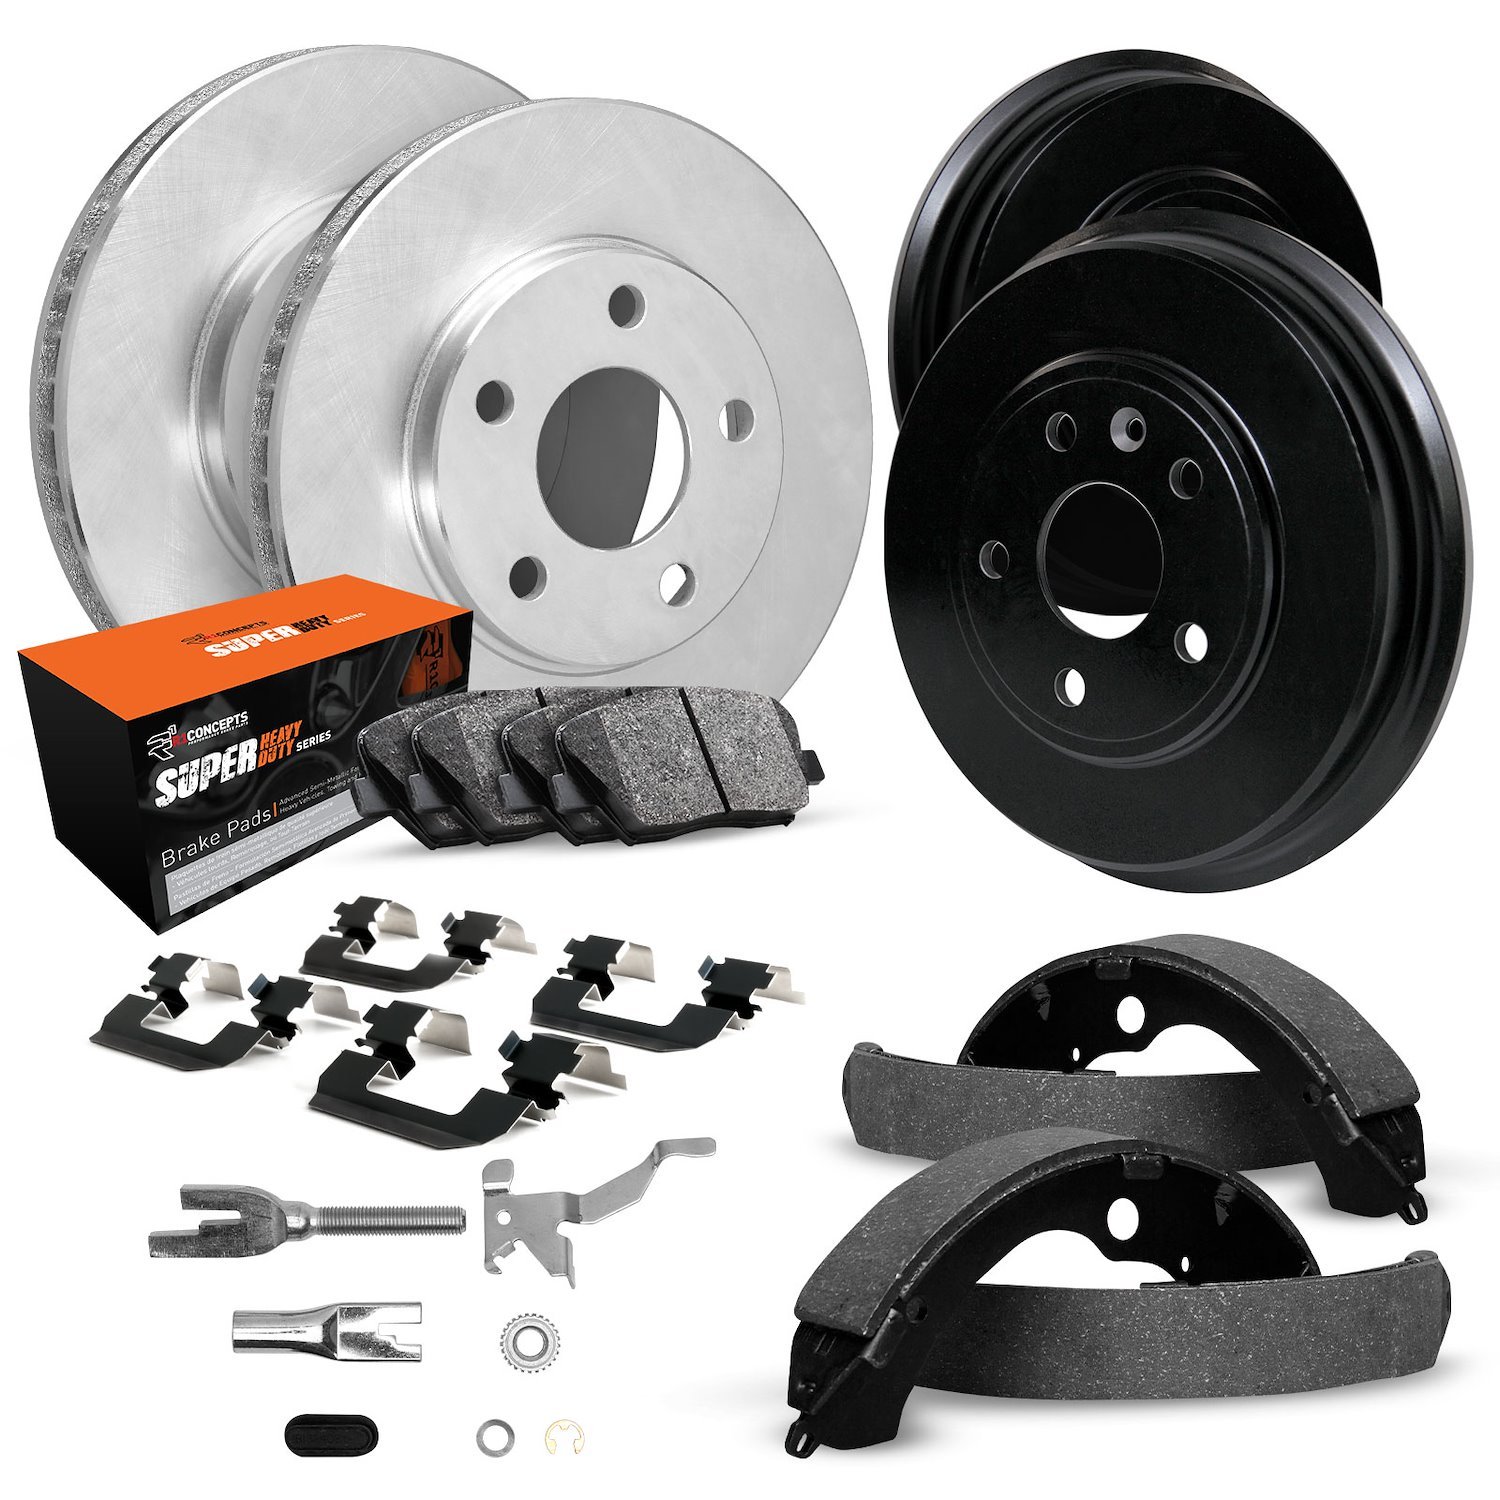 E-Line Blank Brake Rotor & Drum Set w/Super-Duty Pads, Shoes, Hardware, & Adjusters, 1975-1980 Ford/Lincoln/Mercury/Mazda